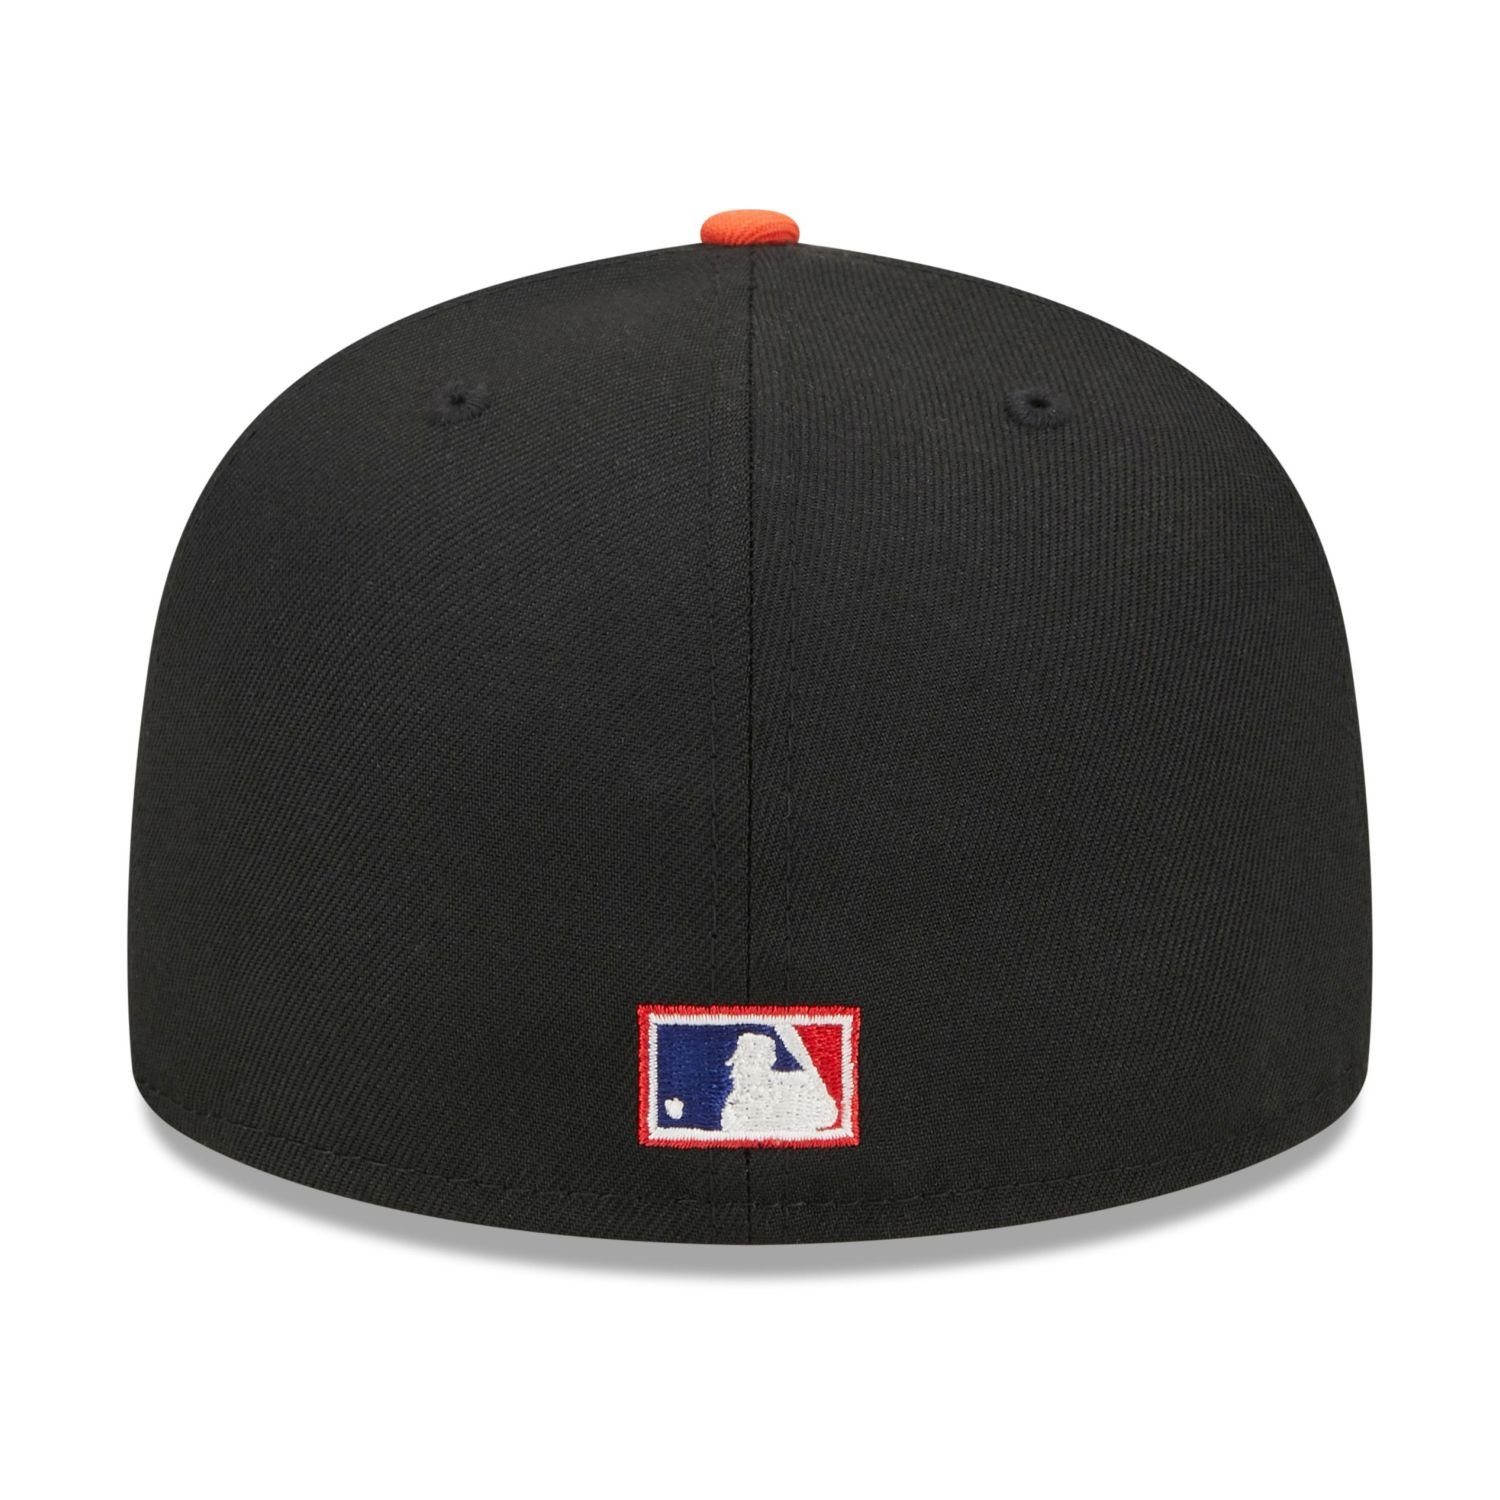 New San Era 59Fifty RETRO Francisco Cap Giants Fitted